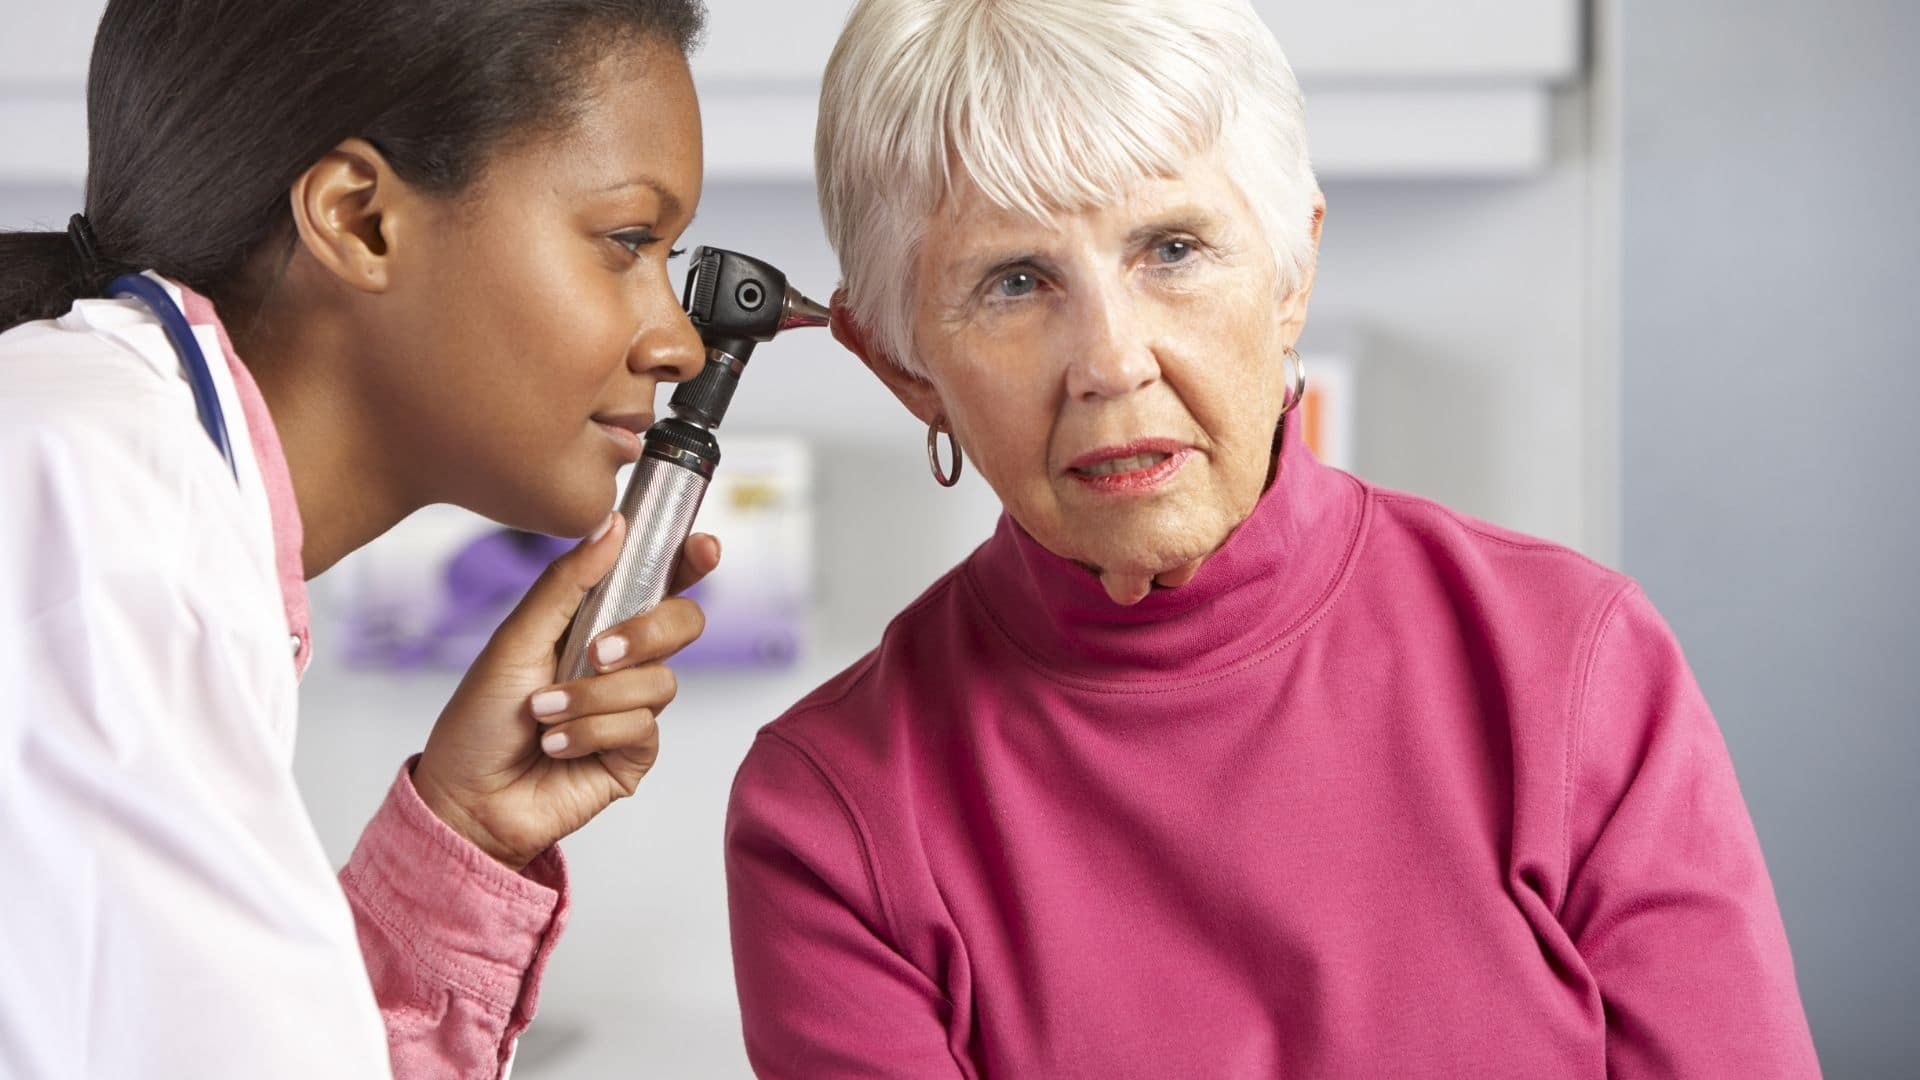 ENT specialist caring for a mature patient as she examines her ears.